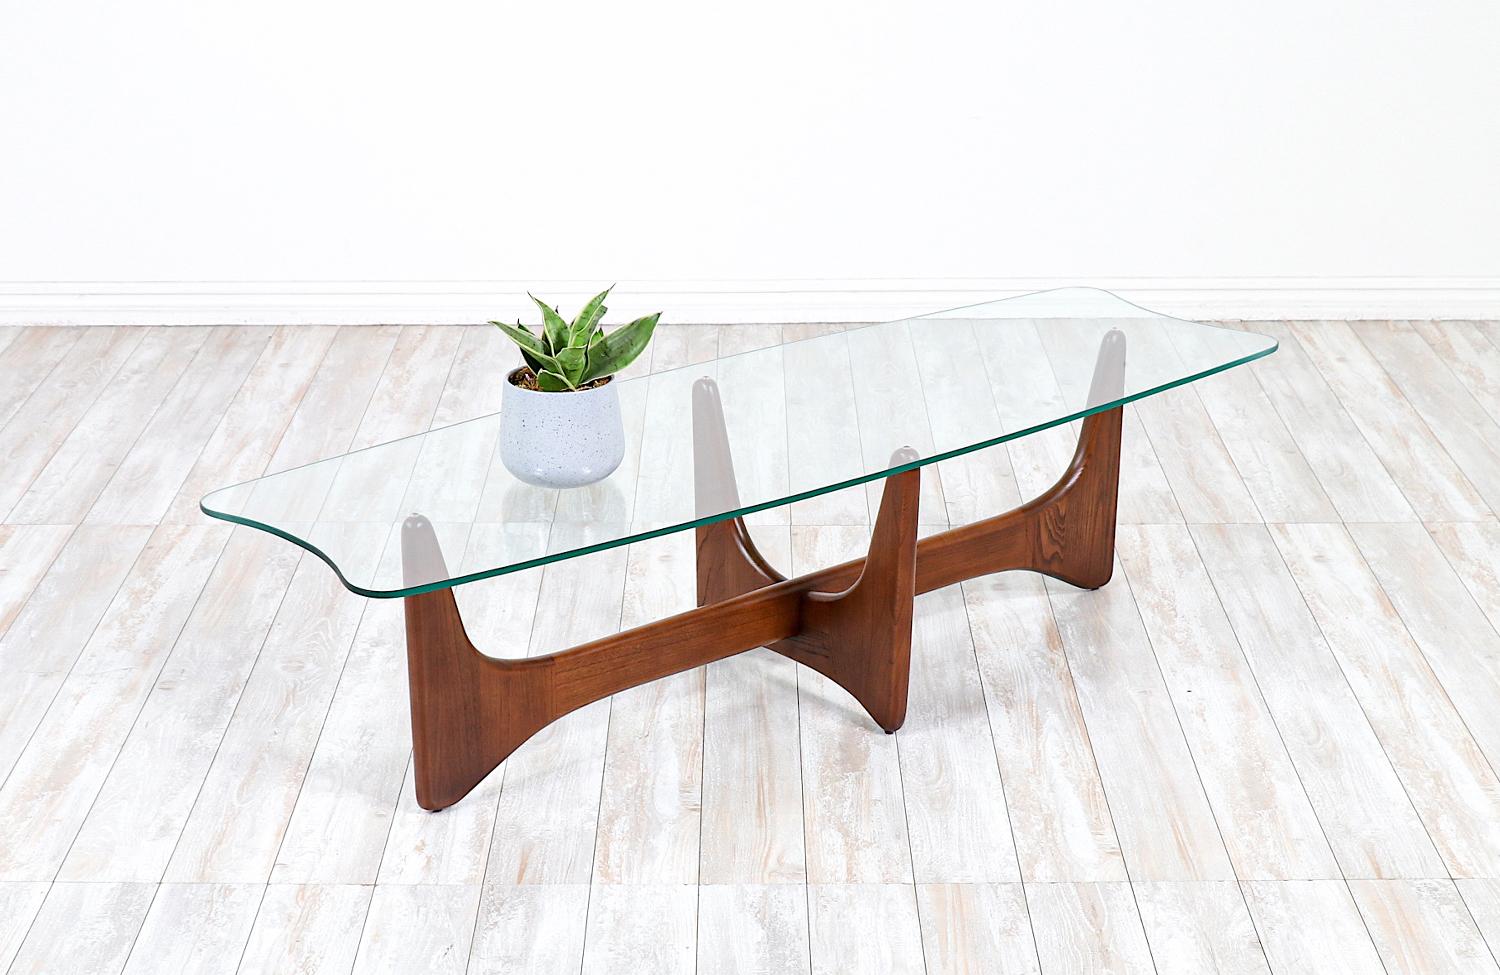 2399-TC sculpted Coffee table designed by Adrian Pearsall for Craft Associates in the United States circa 1960’s. Designed by one of the most iconic American designers, this coffee table is perfect for home or office due to its sculptural walnut